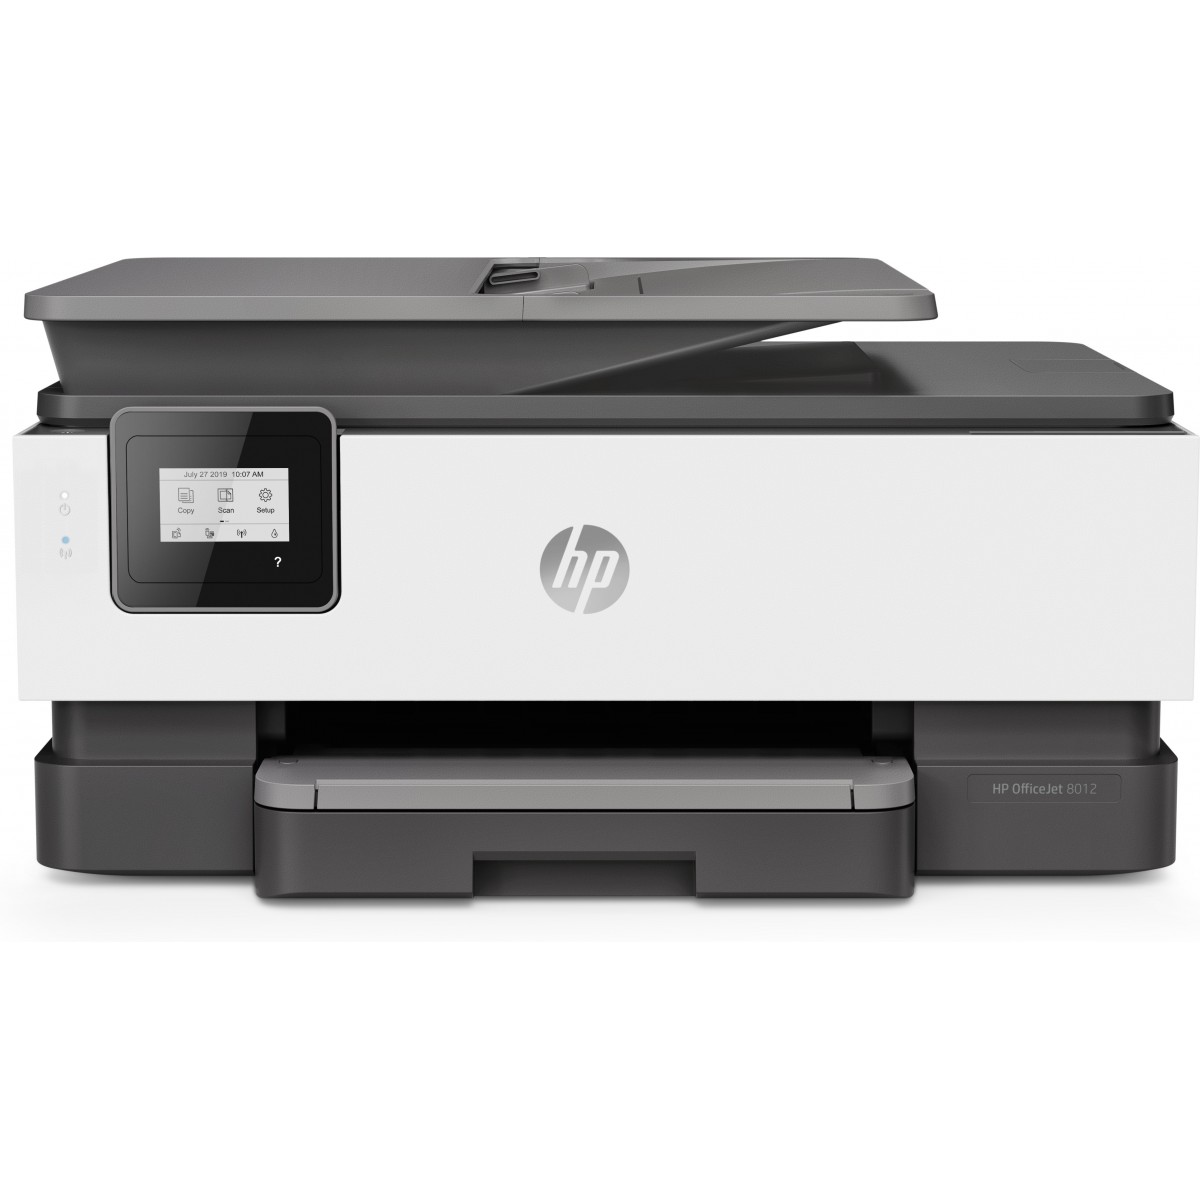 HP OfficeJet 8012 - Thermal inkjet - Colour printing - 4800 x 1200 DPI - A4 - Direct printing - Grey